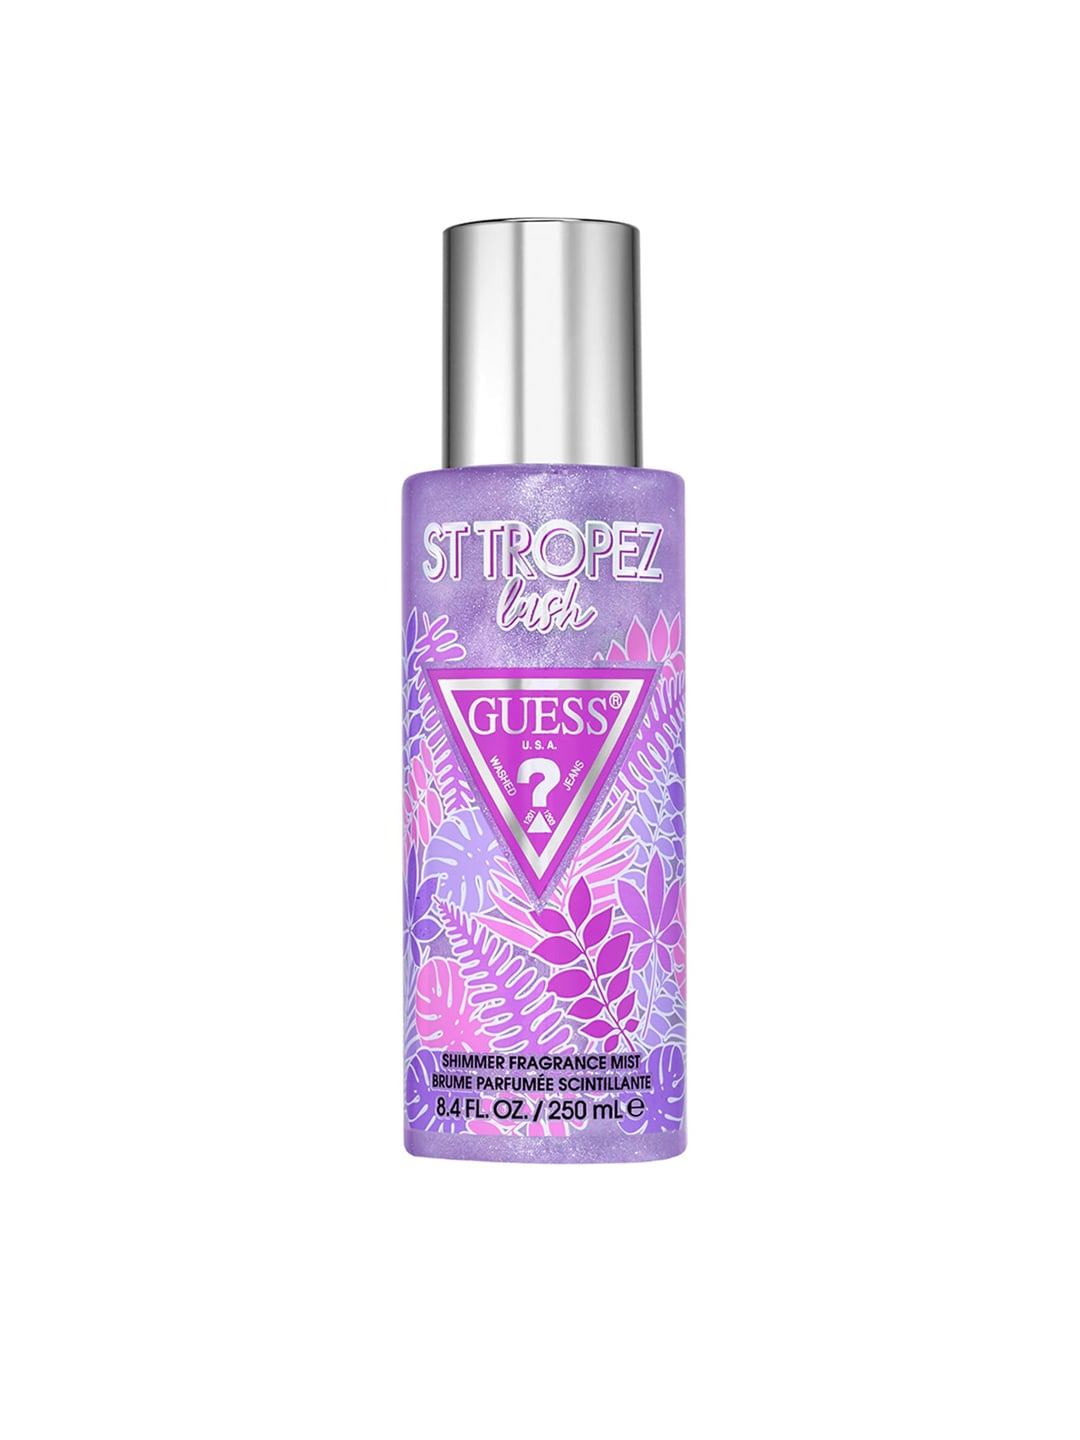 GUESS Destination St.Tropez Lush Shimmer Fragrance Body Mist - 250ml Price in India